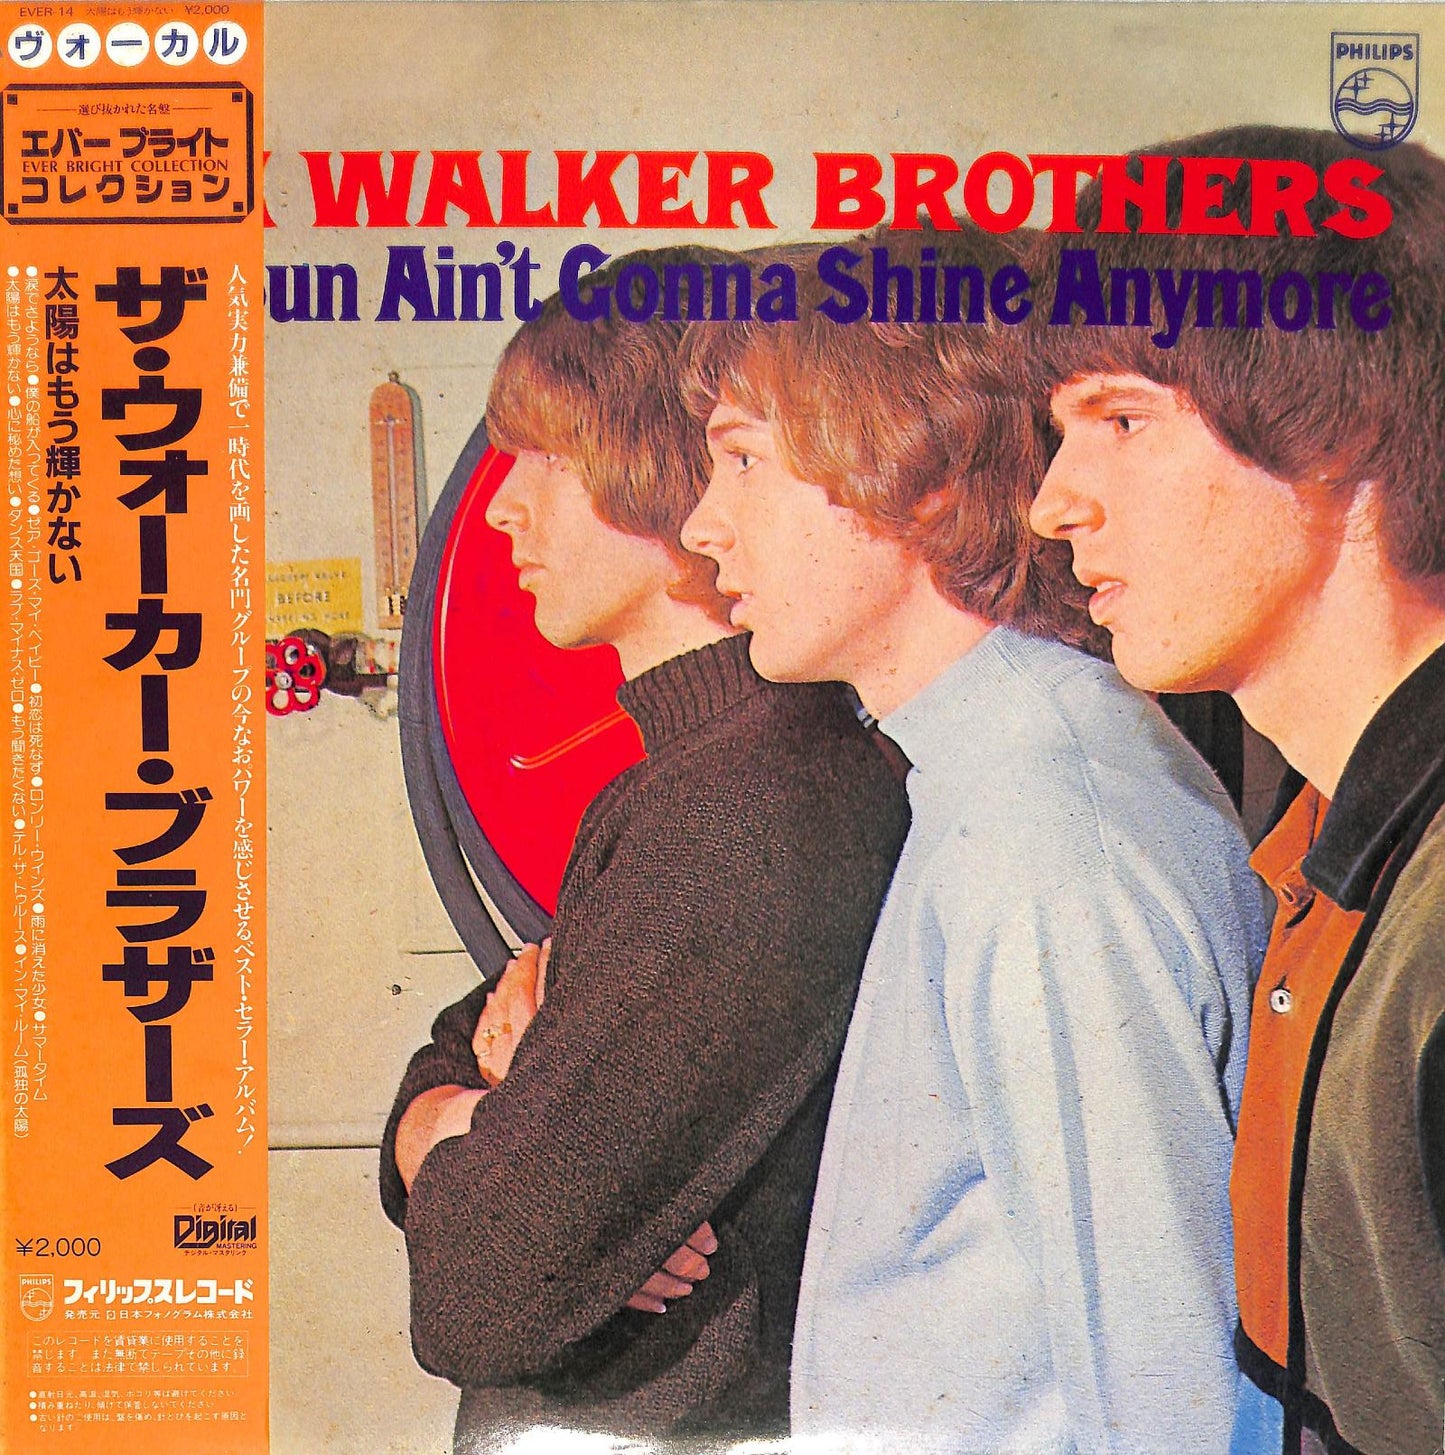 THE WALKER BROTHERS - The Sun Ain't Gonna Shine Anymore